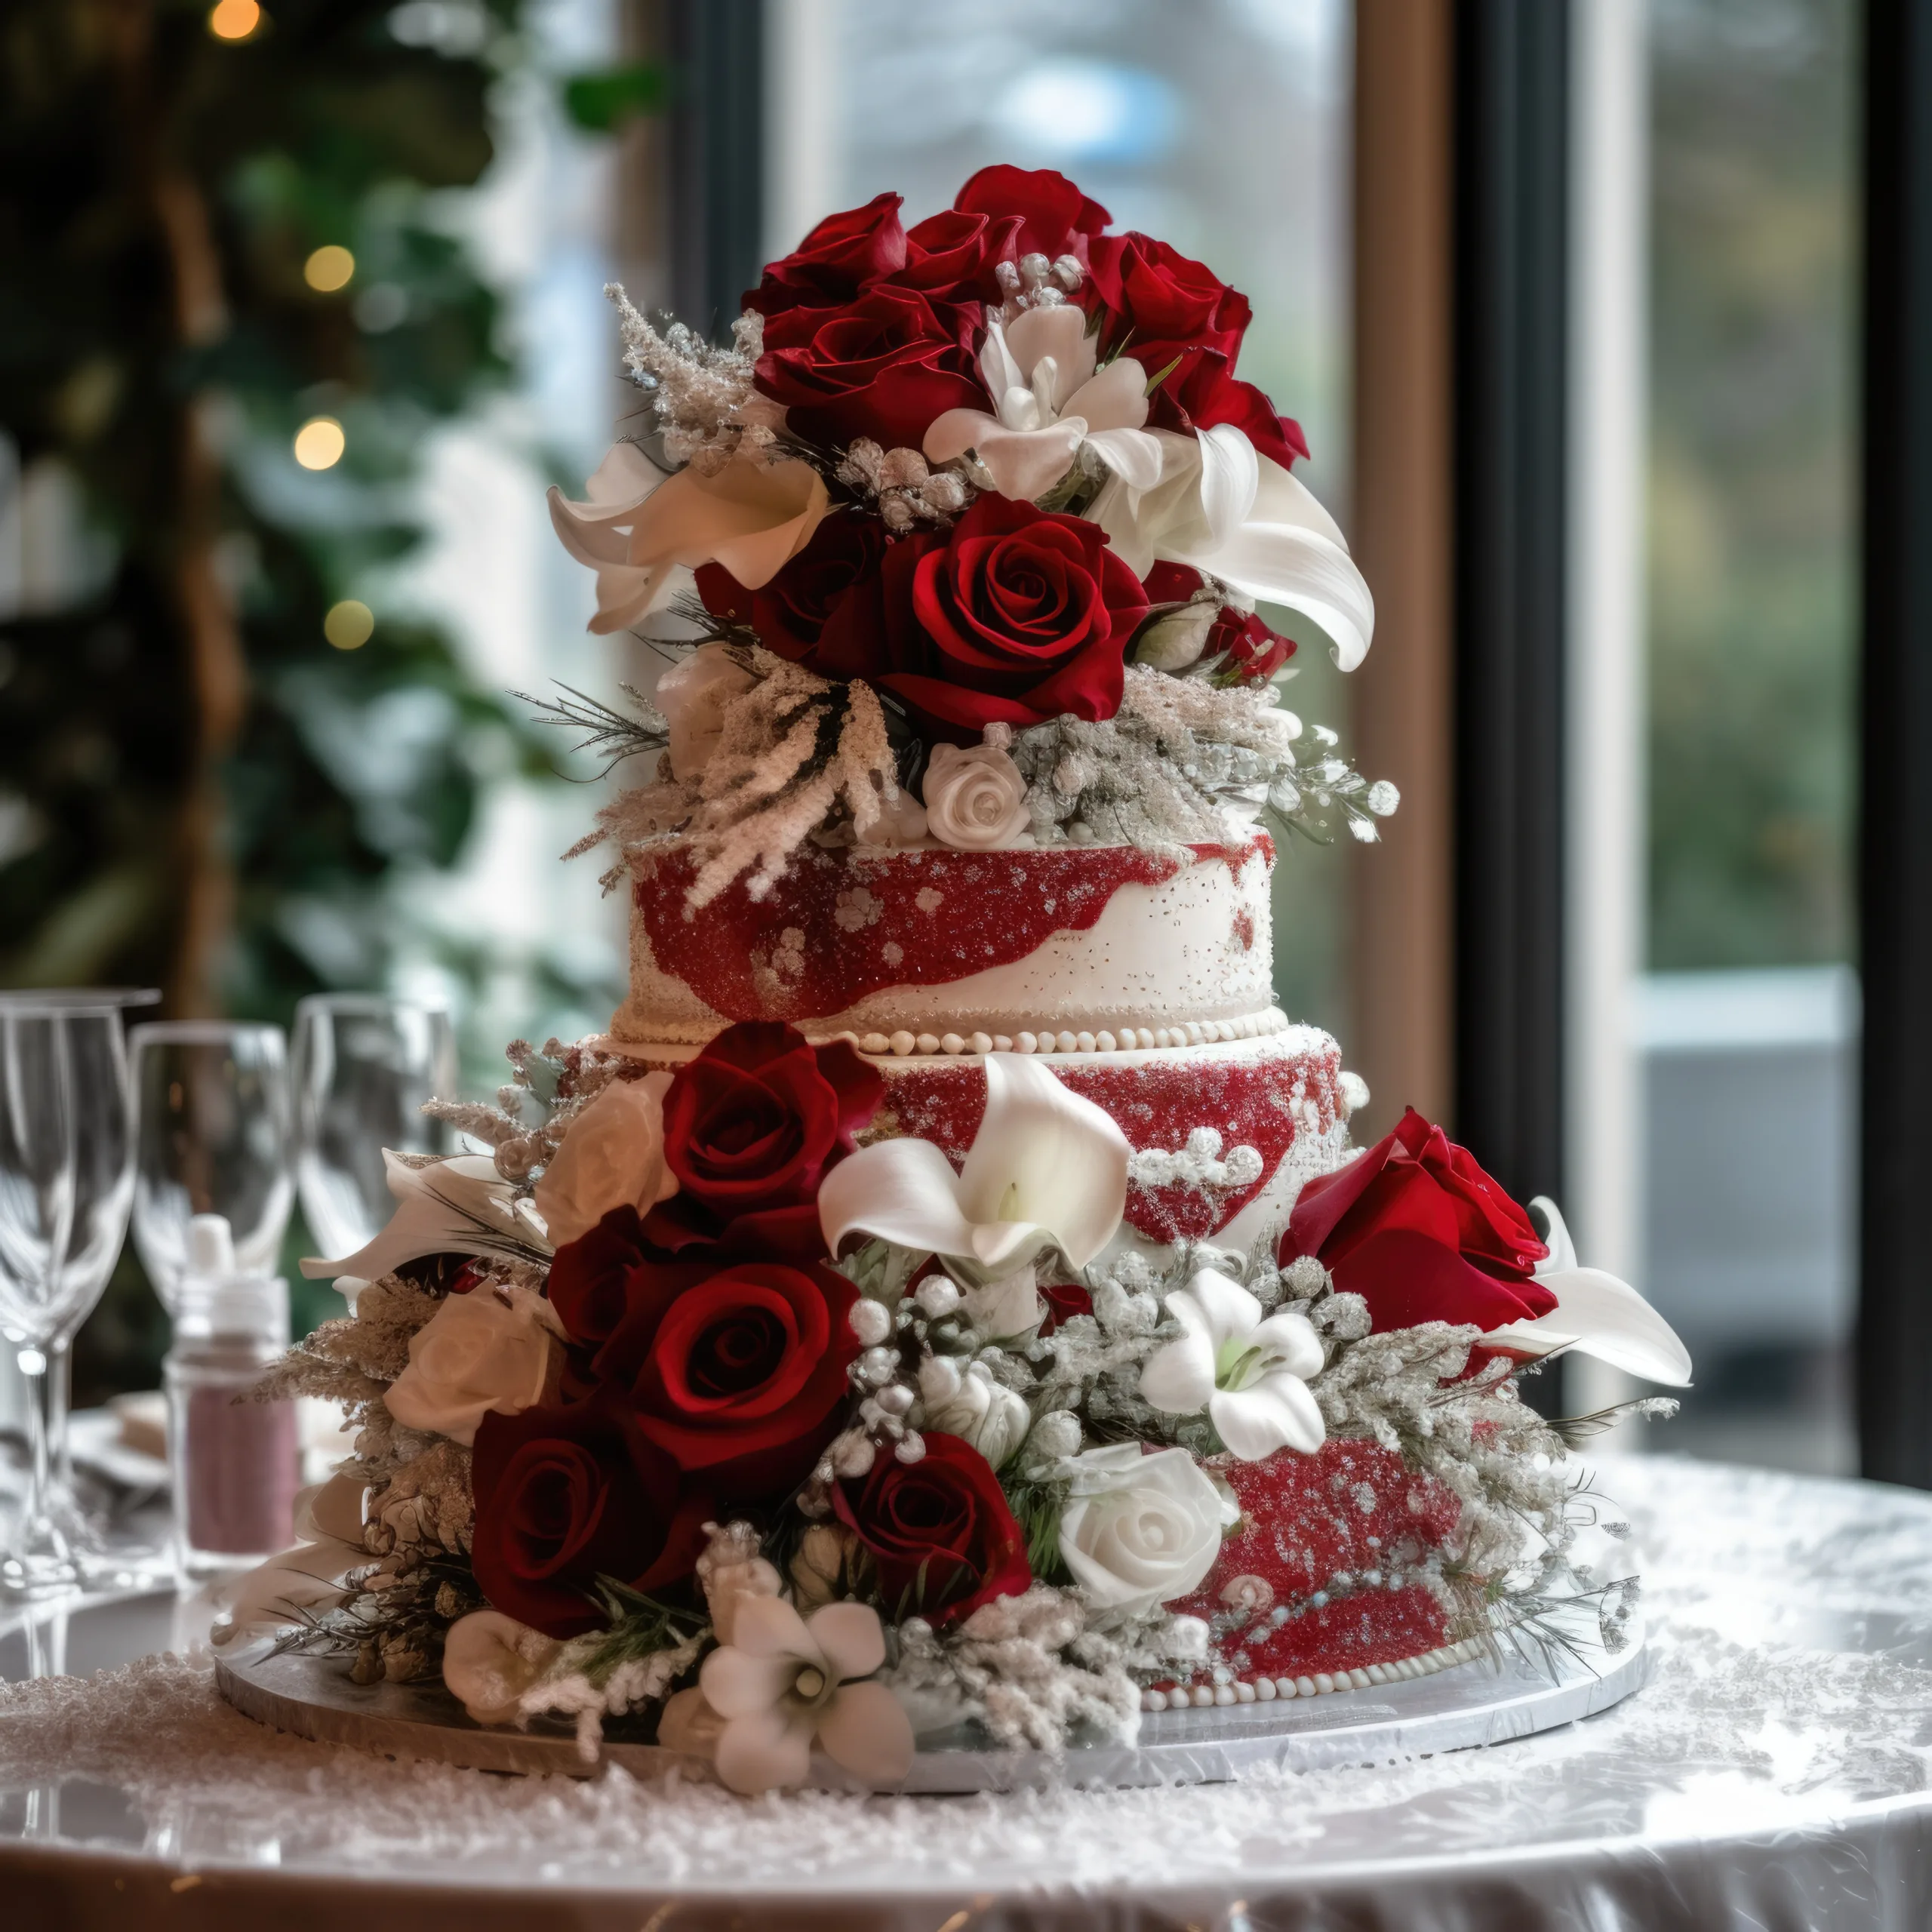 Farleigh House Photographer: A wedding cake with red roses and white lilies.